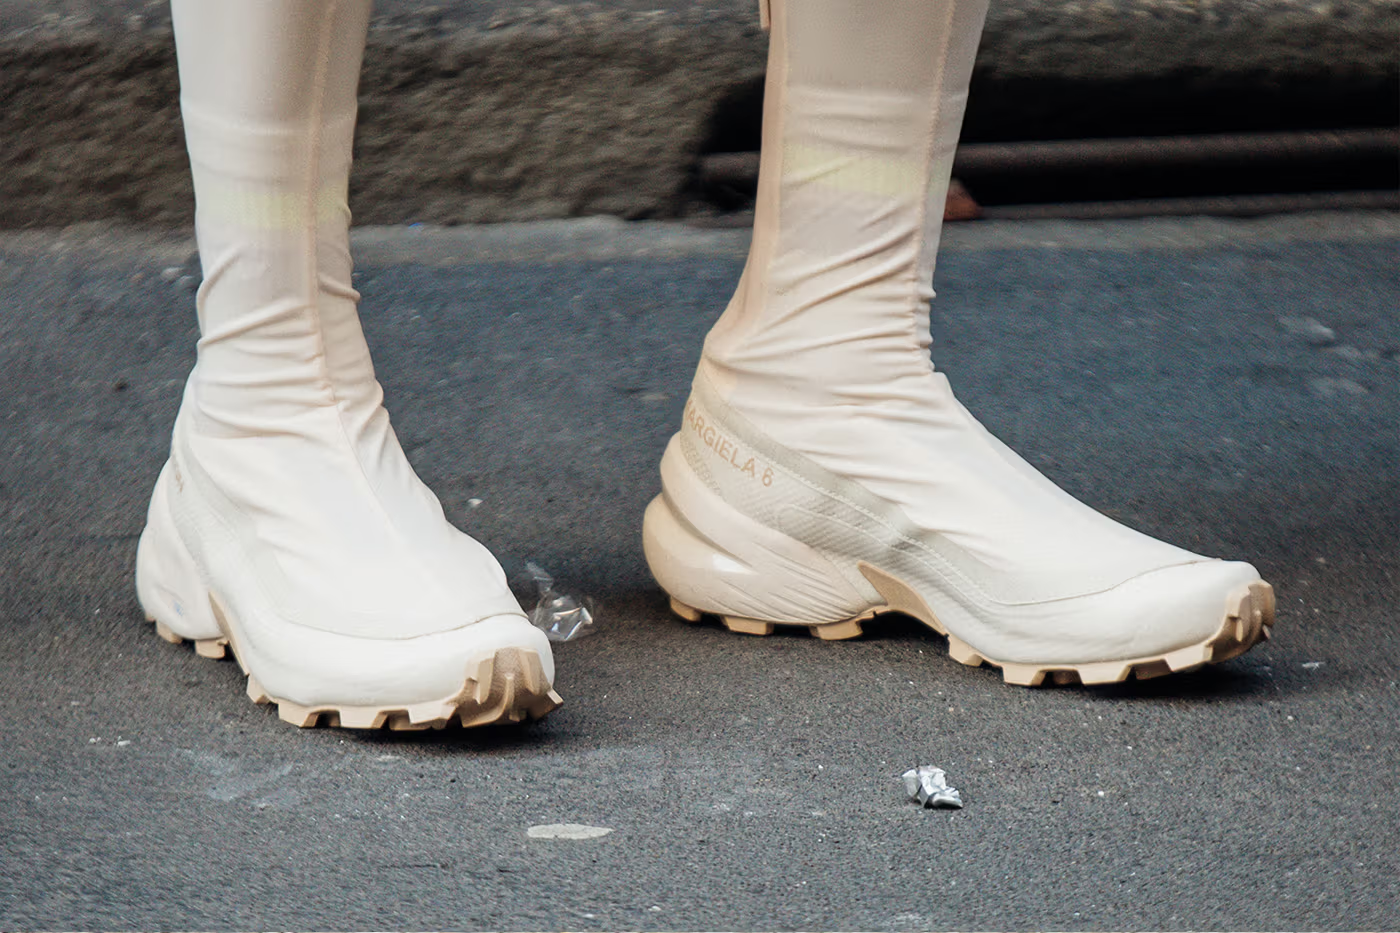 Close up view of the margiela 6 footwear at the event